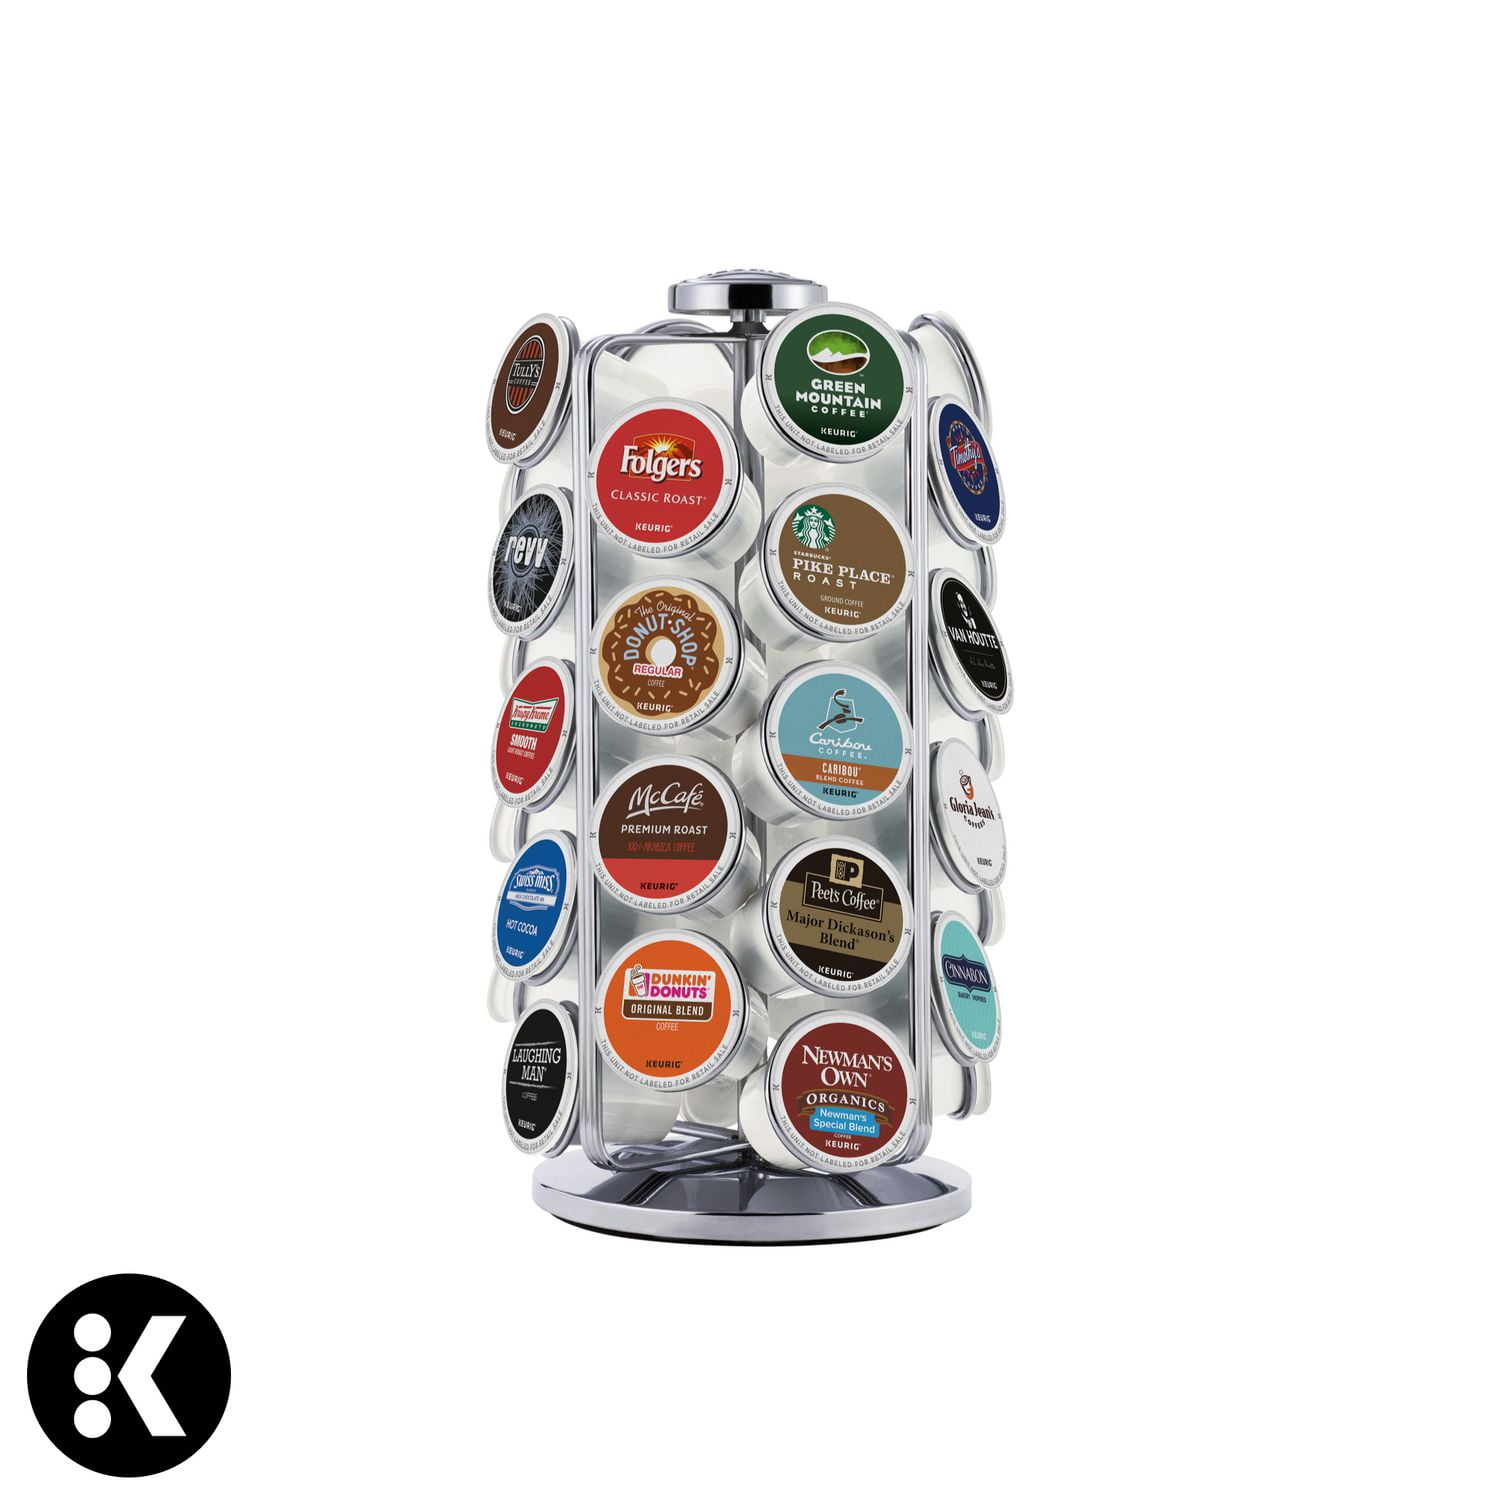 Keurig® K-Cup® Pod Carousel, Can hold 36 K-Cup® pods 